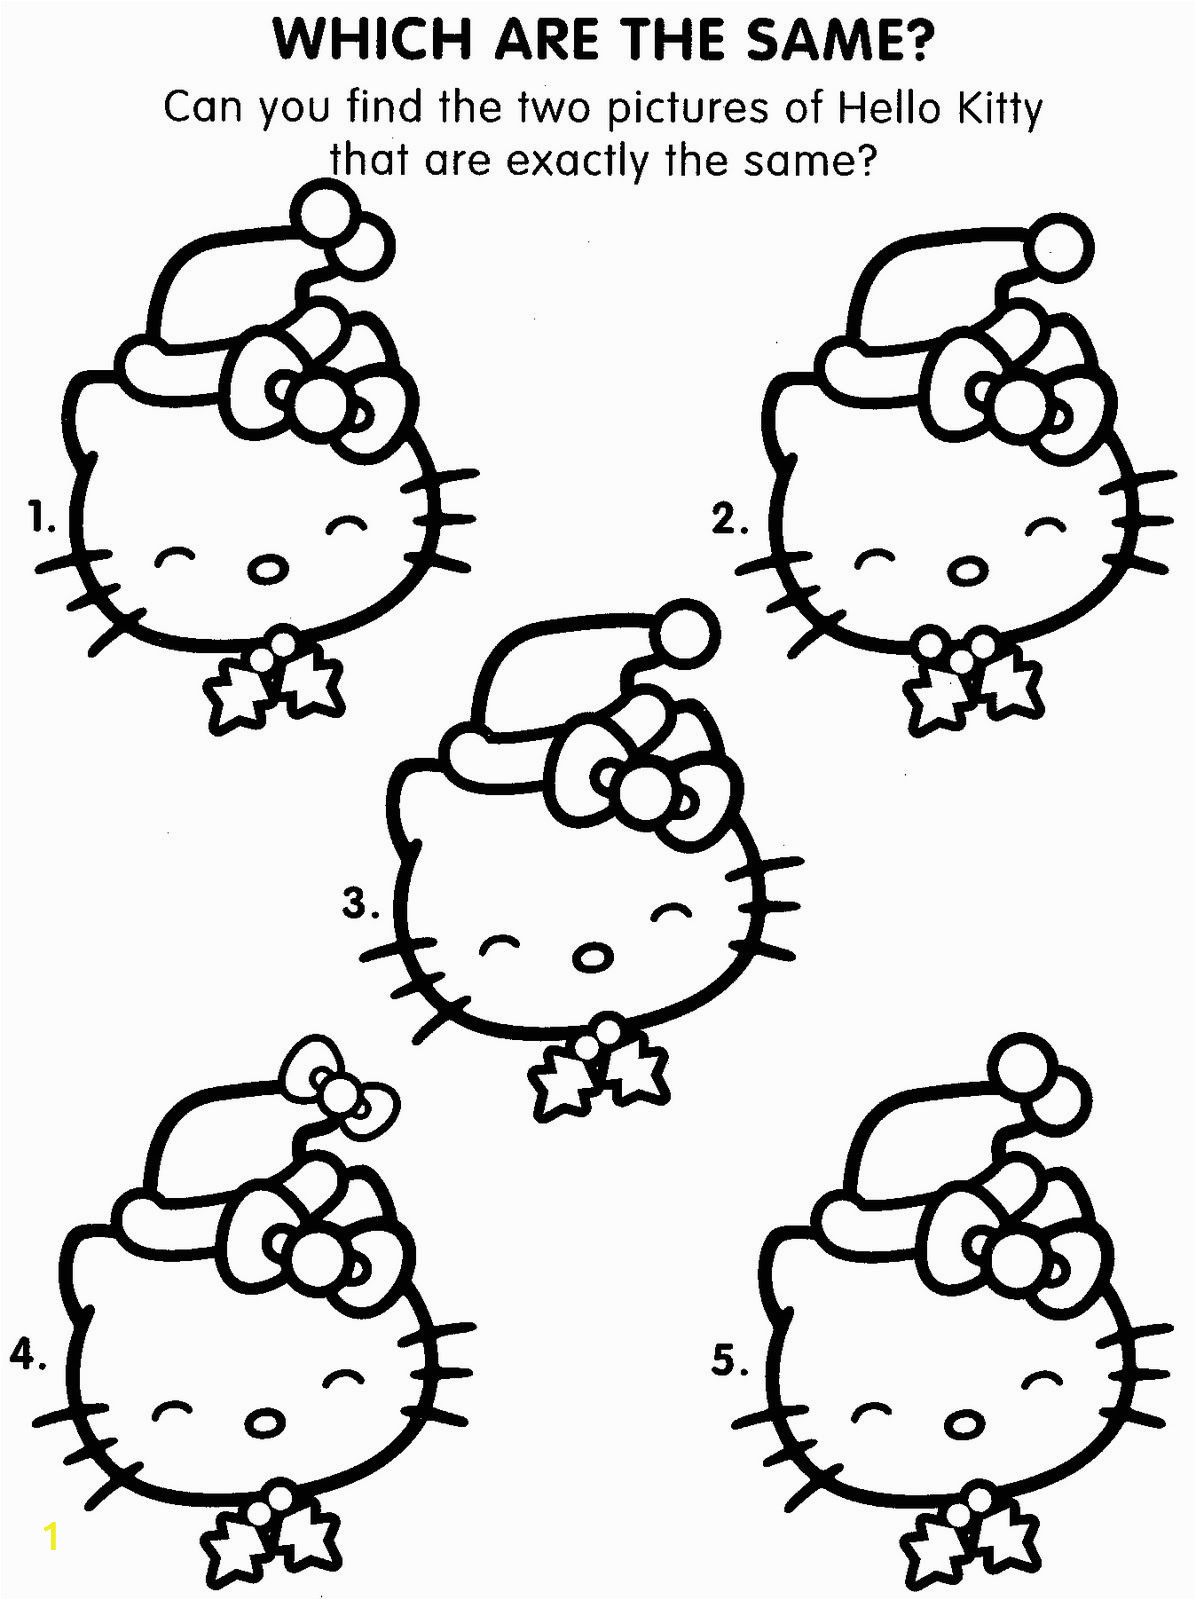 Hello Kitty Christmas Coloring Pages to Print ...